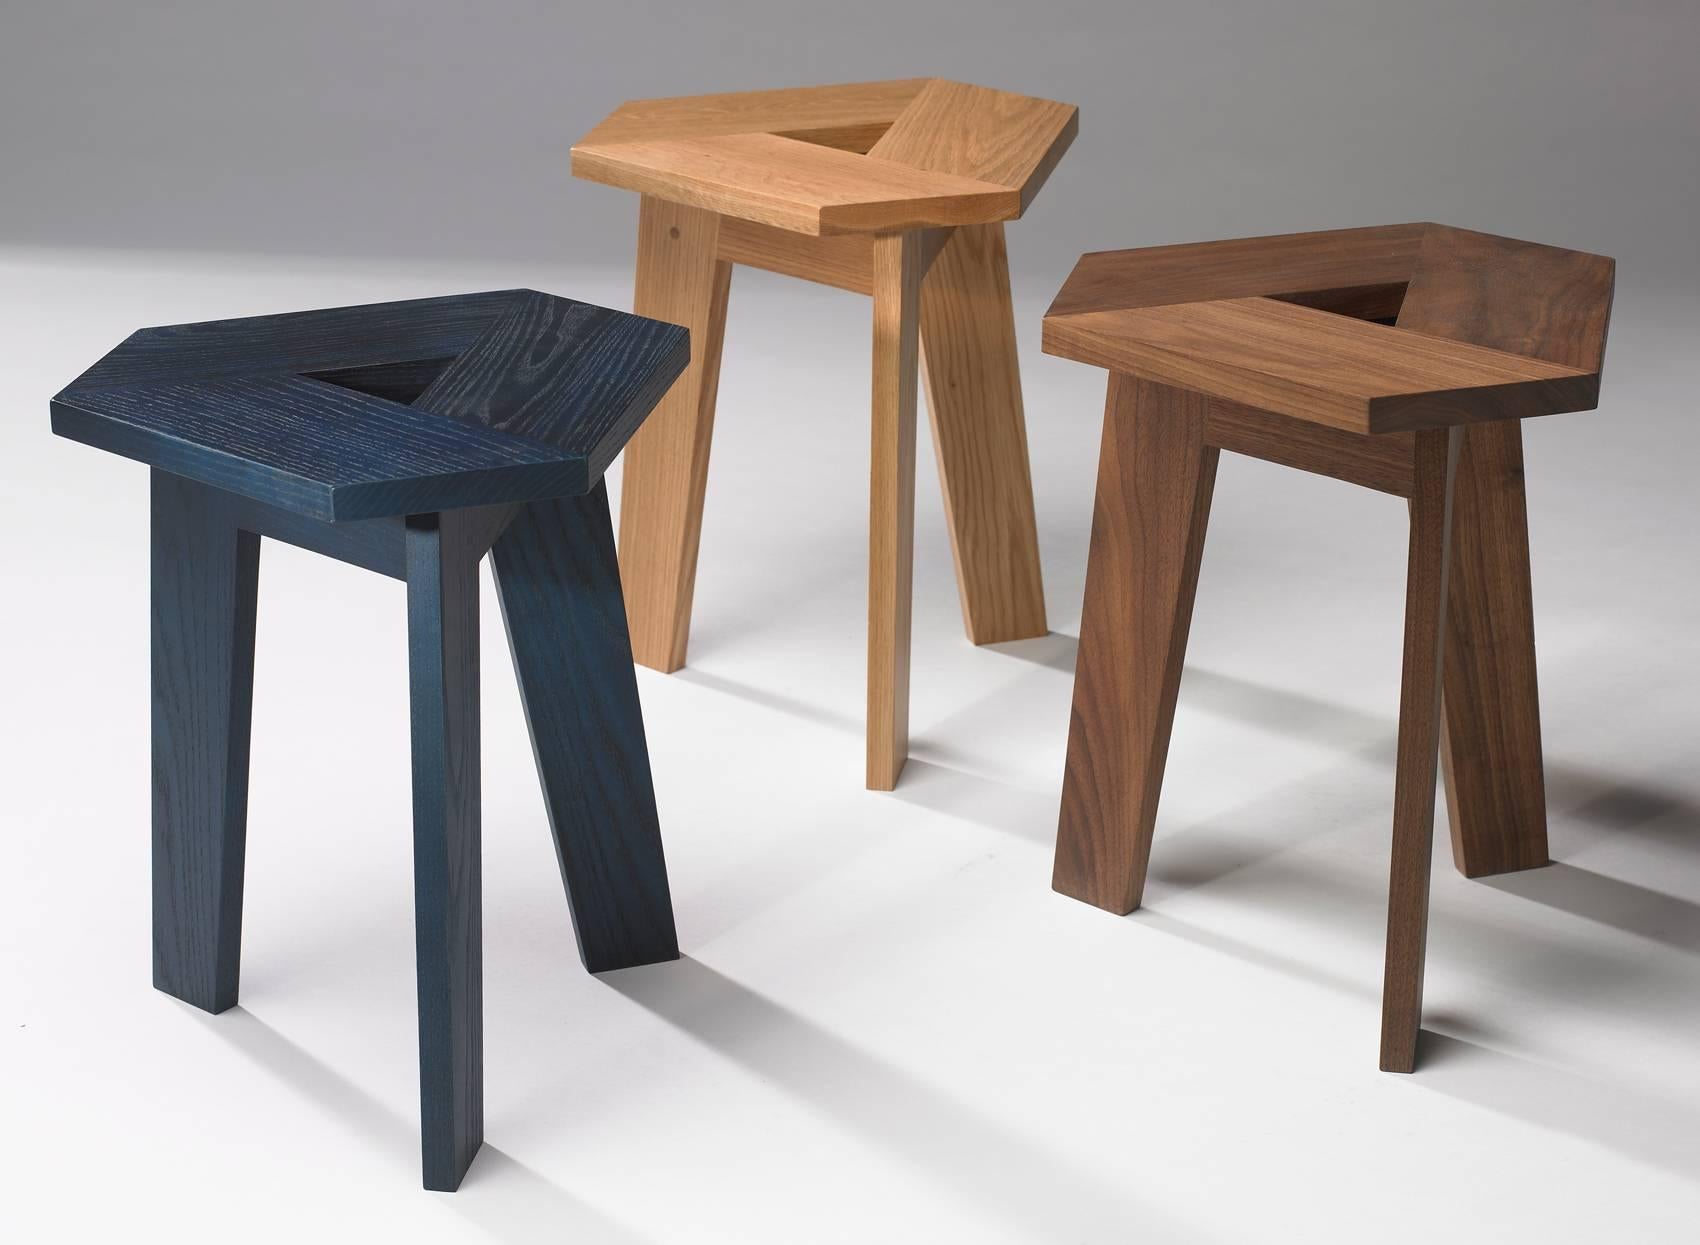 A very adaptable stool or side table in solid walnut - custom finishes and other woods available. A minimal design which is comprised of three separate pieces repeated three times and the hand hold in the middle allows for easy movement around the